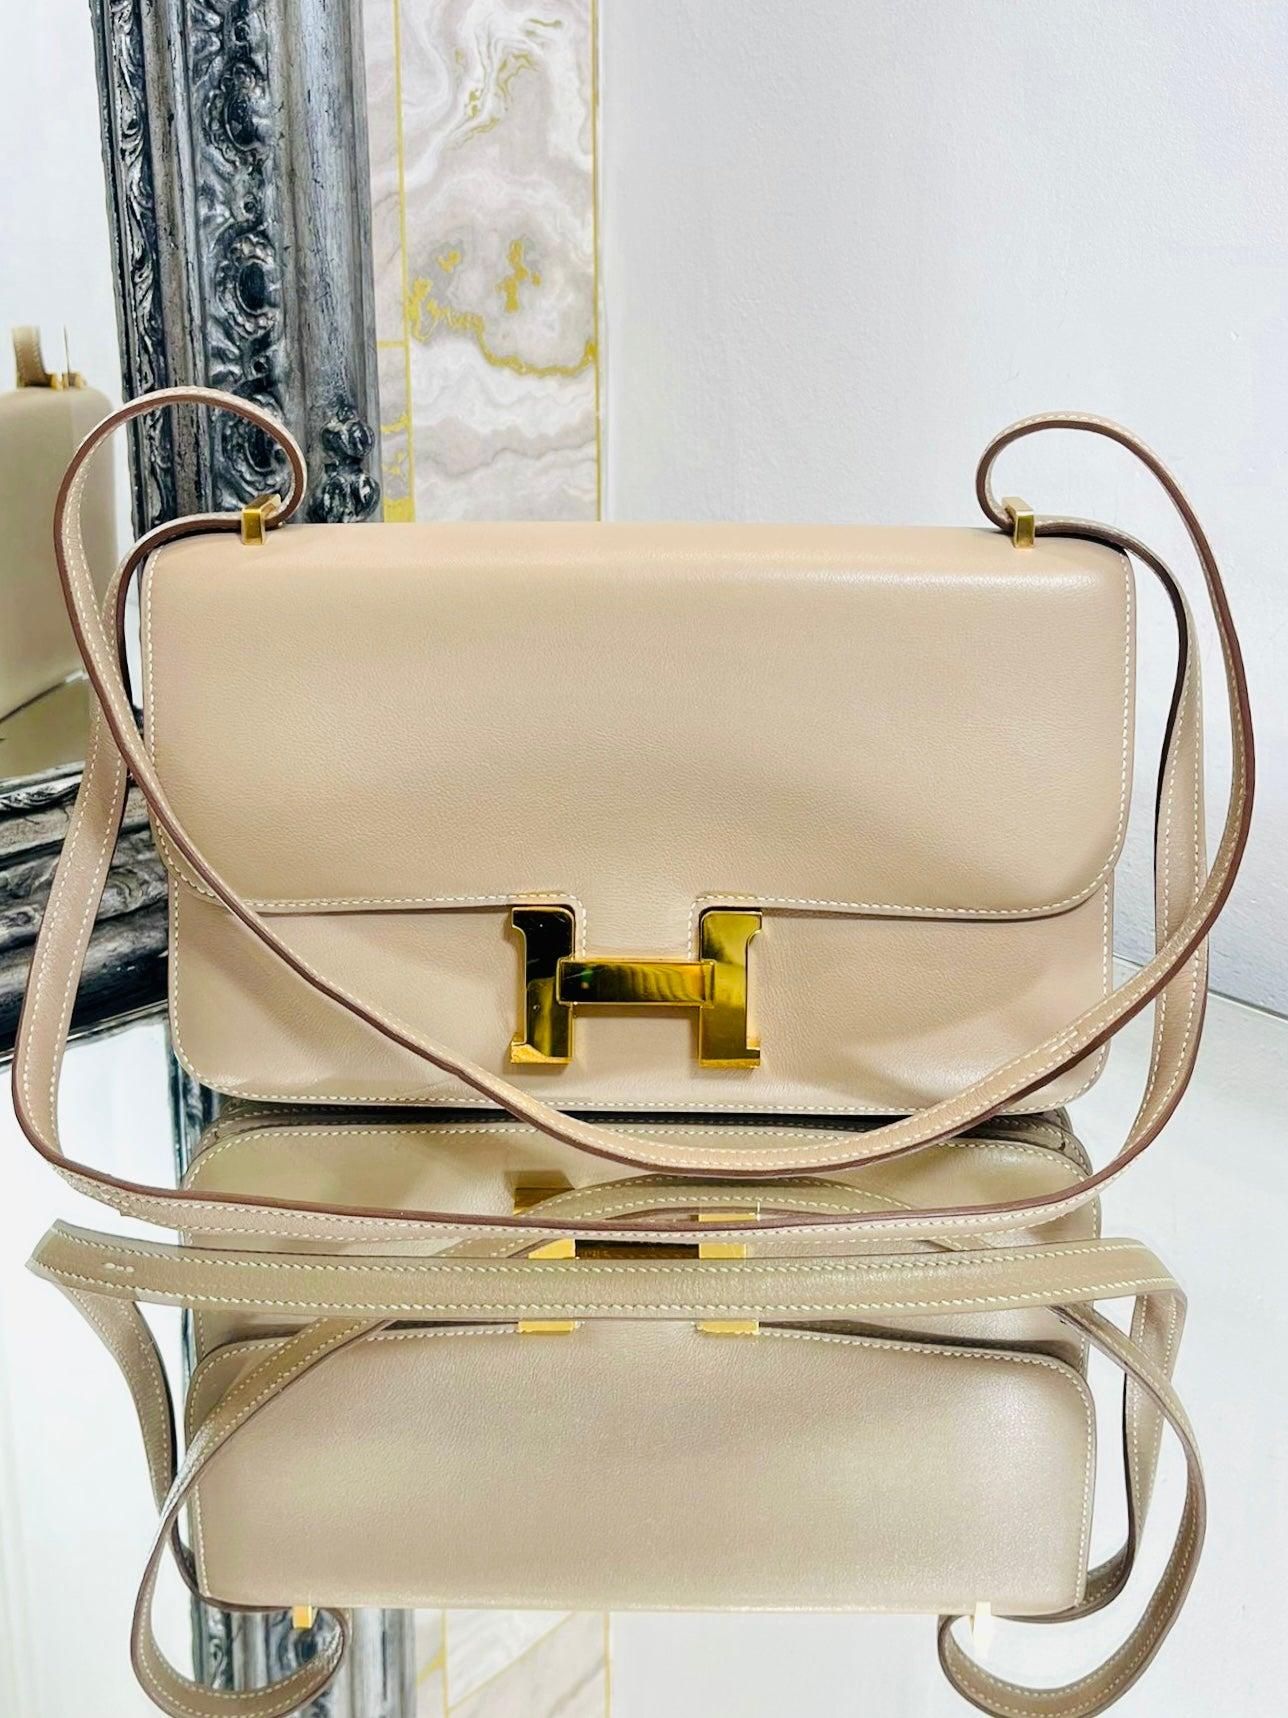 Hermes Constance Elan Crossbody Bag

Taupe leather with gold hardware. Crossbody strap.

Date code 2012.

Size - Height 16cm, Width 29cm, Depth 5cm

Condition - Very Good (Some light scratches to hardware)

Composition - Leather

Comes With - Box,